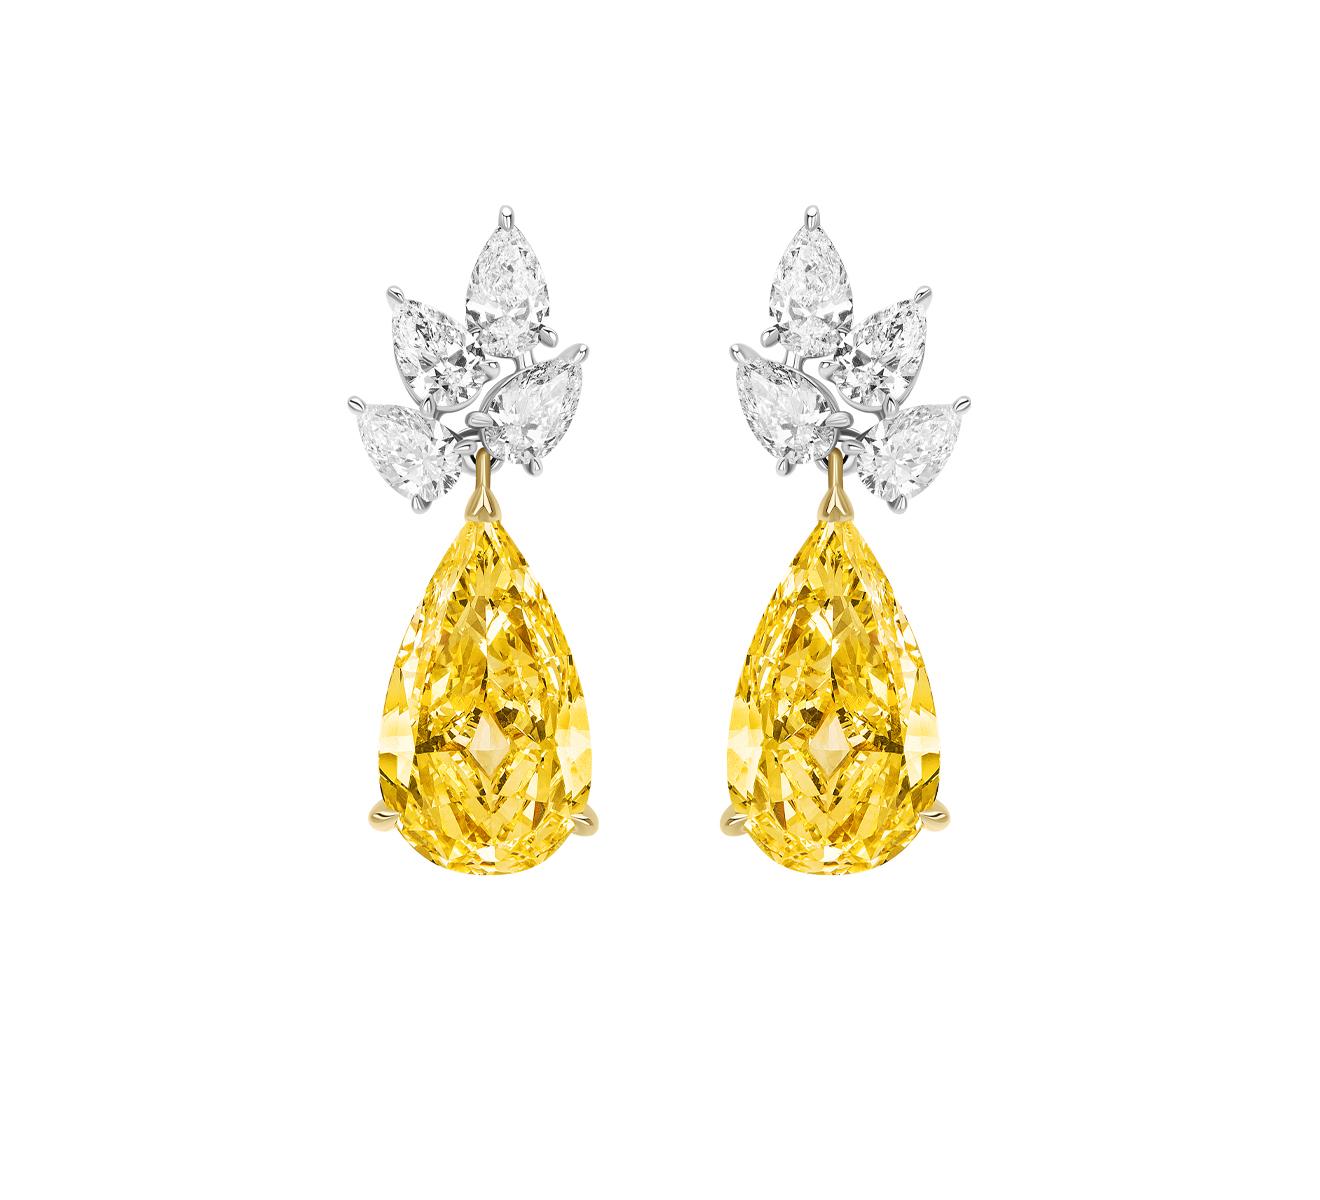 Magnificent Pear Shape Yellow Diamonds suspended from a Cluster of White Pear shape Diamonds. 

Yellow Diamonds weighing 10.01 Carats
White Diamonds weighing 4.05 Carats. 

Set in Platinum and 18 Karat Yellow Gold